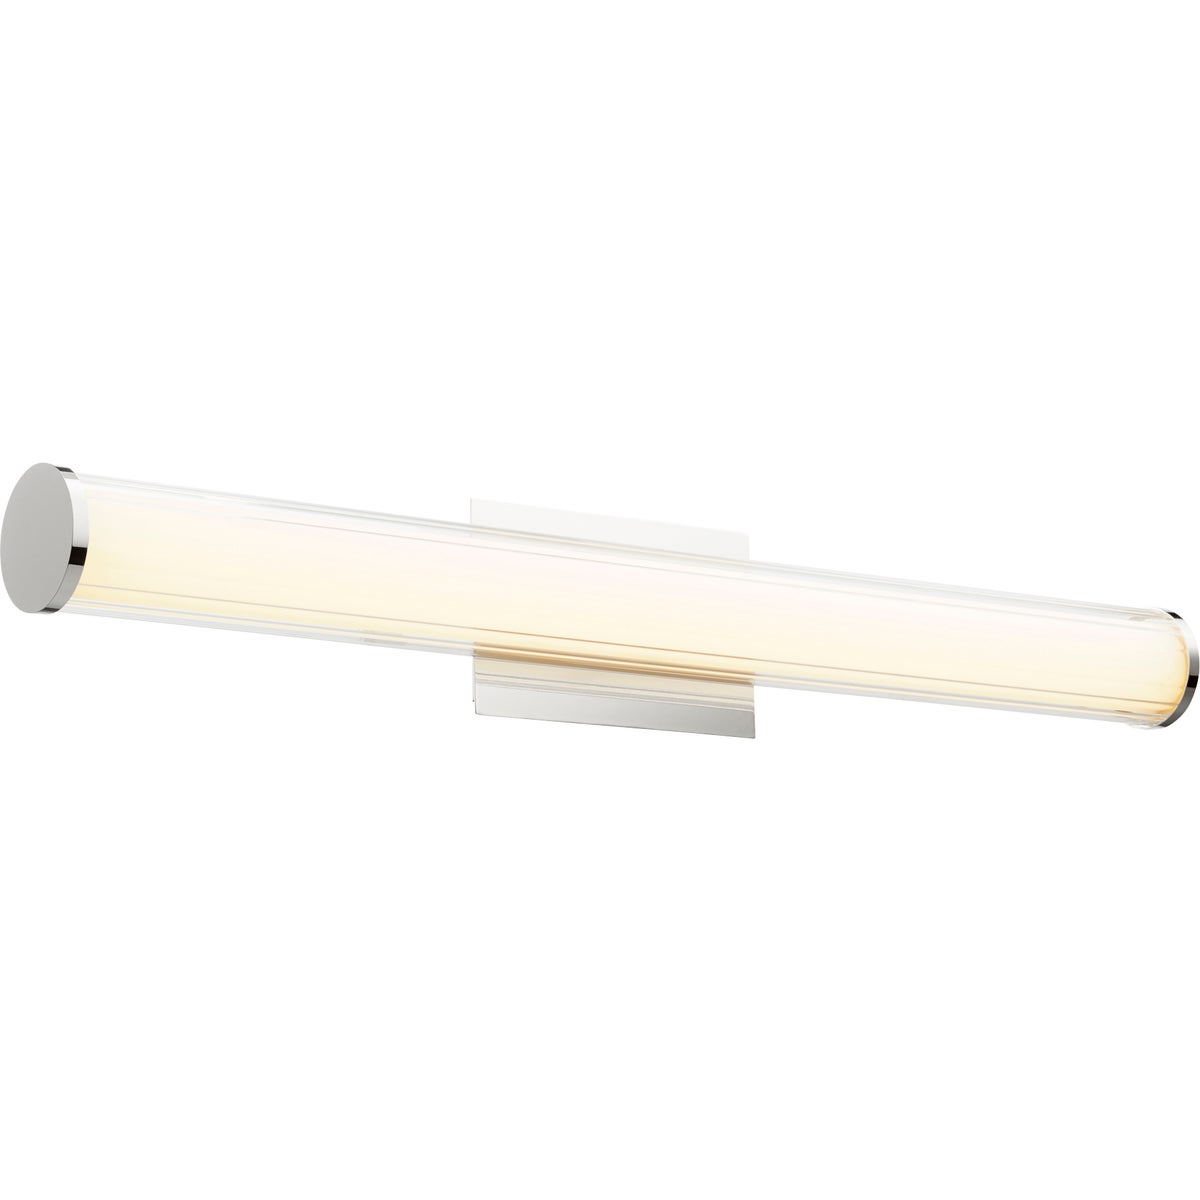 LED Vanity Light by Quorum International - A sleek and modern light fixture with clean lines. Perfect for any residential space. 26W LED, 2205 lumens, 3000K color temperature, dimmable. UL Listed, Damp Location rated. 34.5"W x 5.25"H x 3.75"E. 2-year warranty.